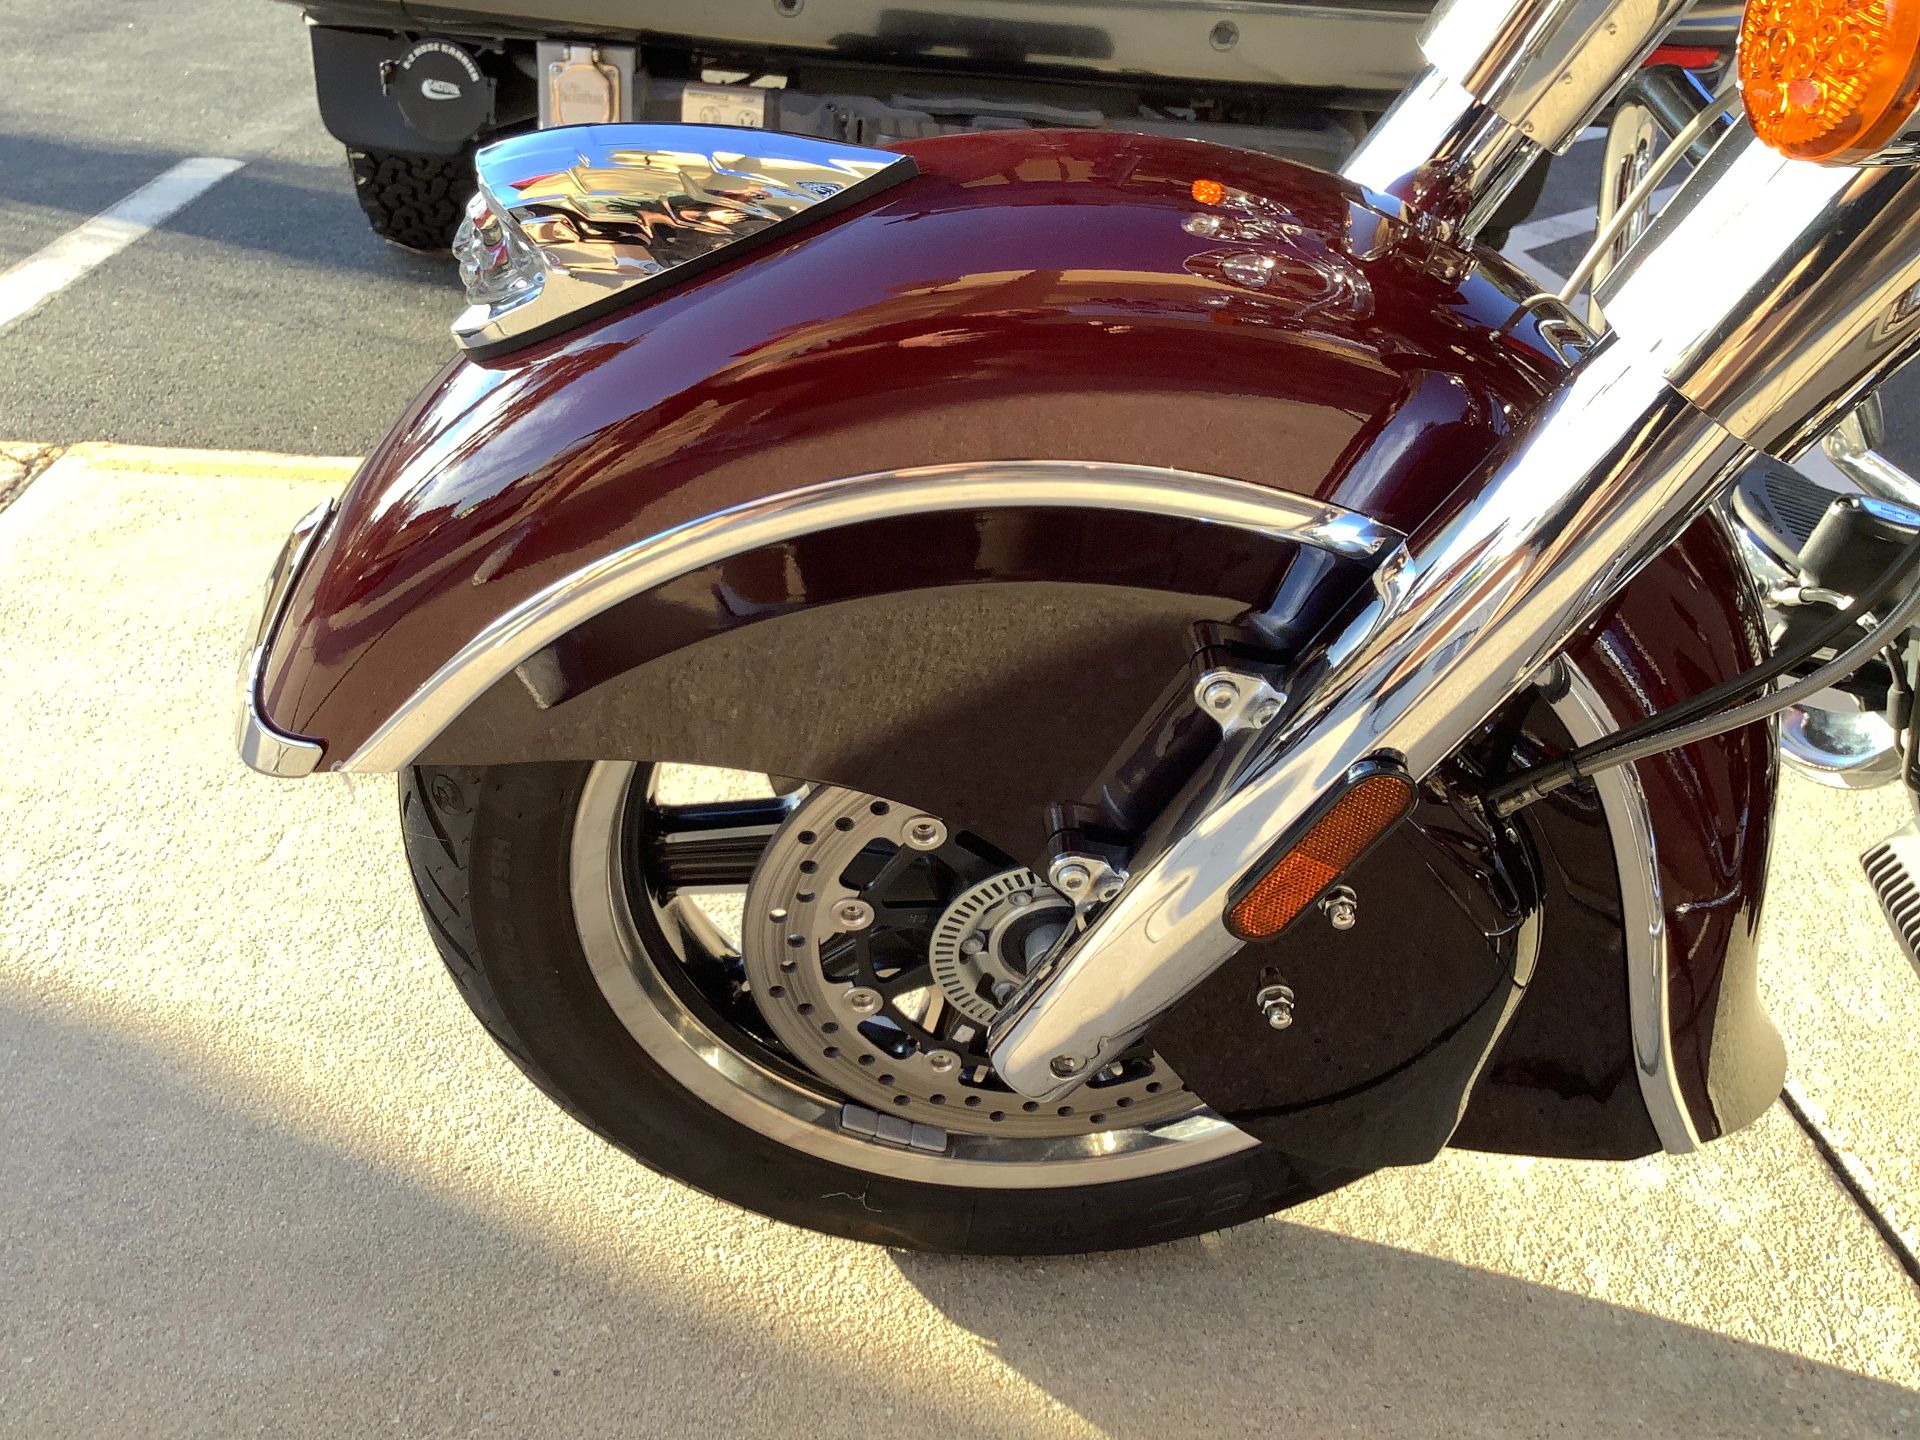 2022 Indian Motorcycle SPRINGFIELD TWO TONE in Panama City Beach, Florida - Photo 17